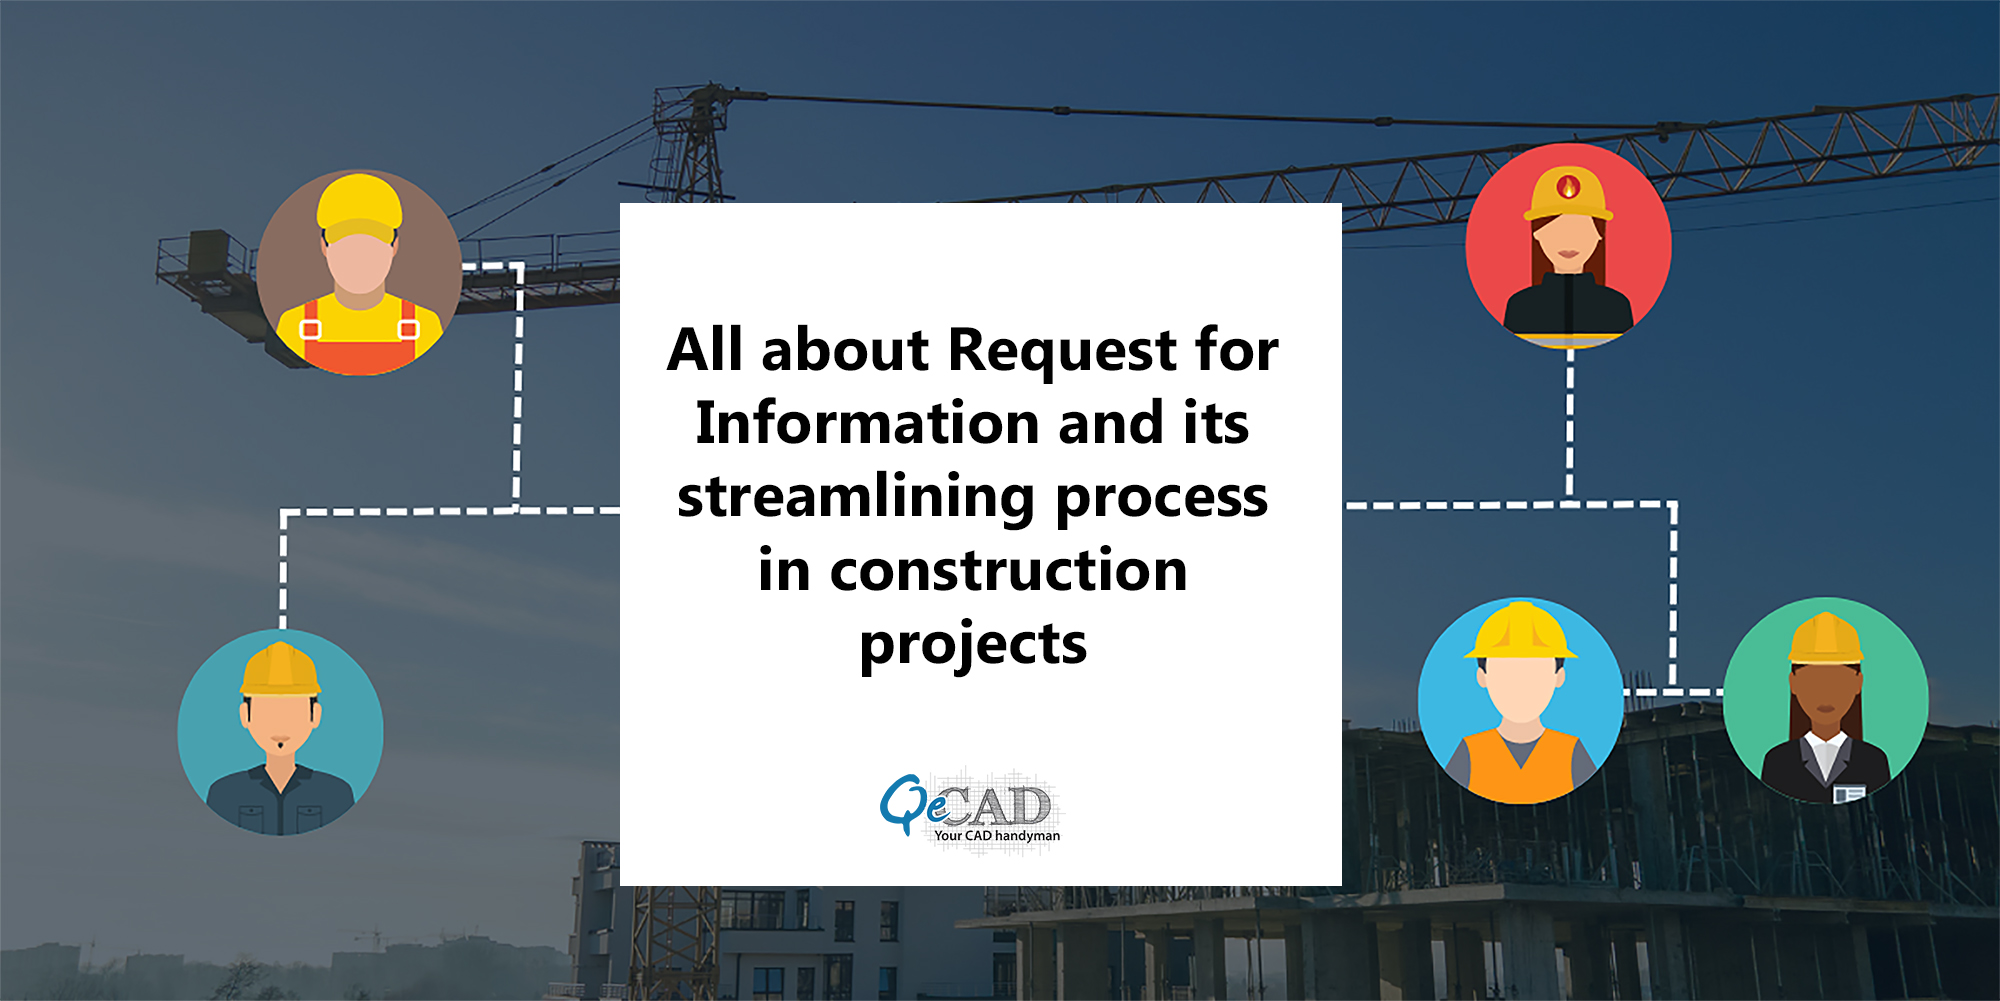 All about Request for Information and its streamlining process in construction projects